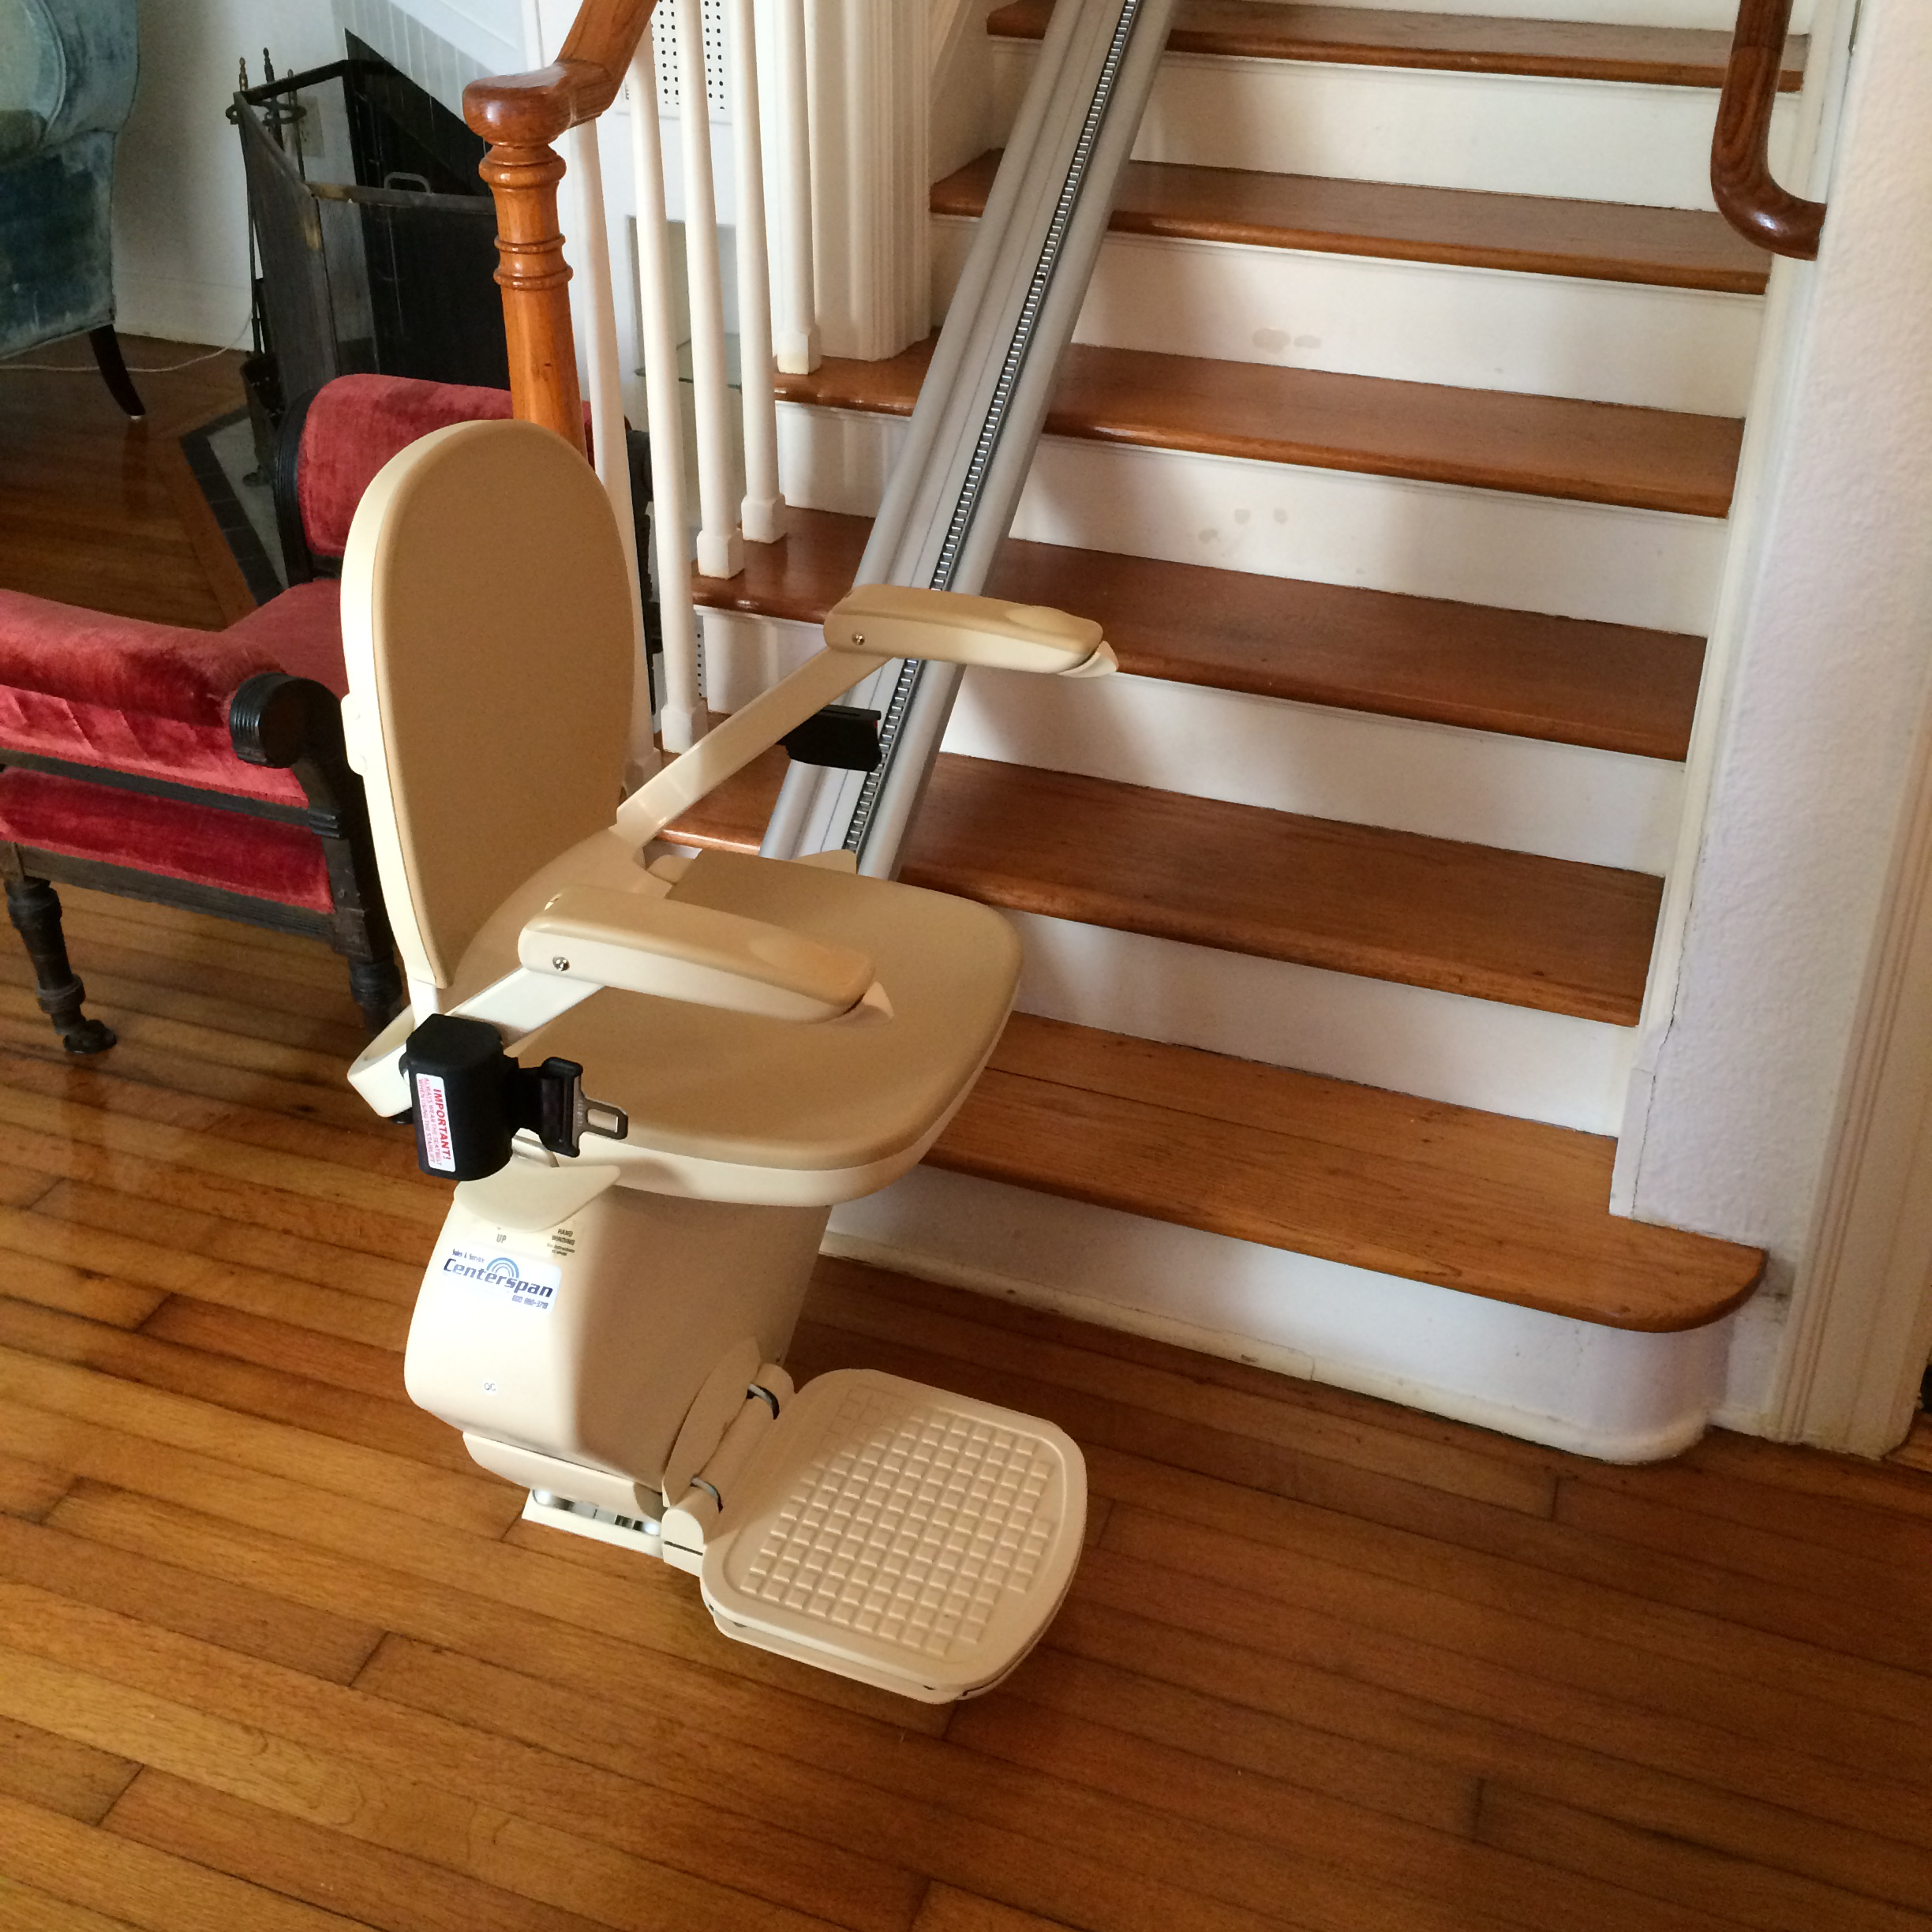 Benefits of Adding a Stairlift to Your Home